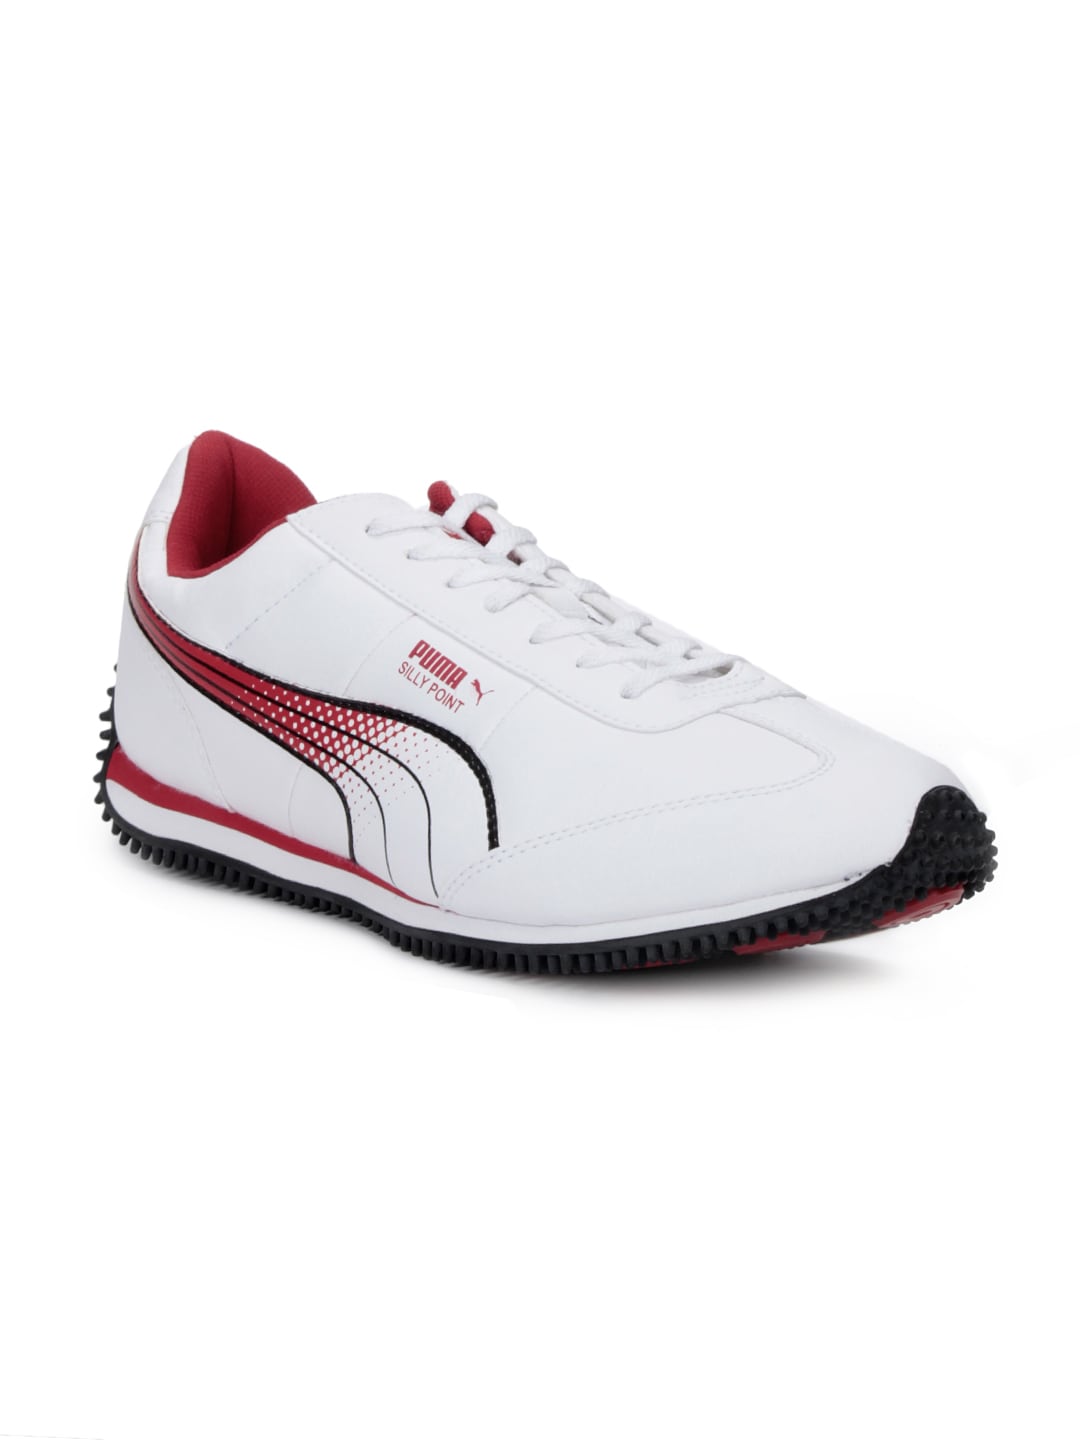 Puma Men Silly Point White & Red Sports Shoes